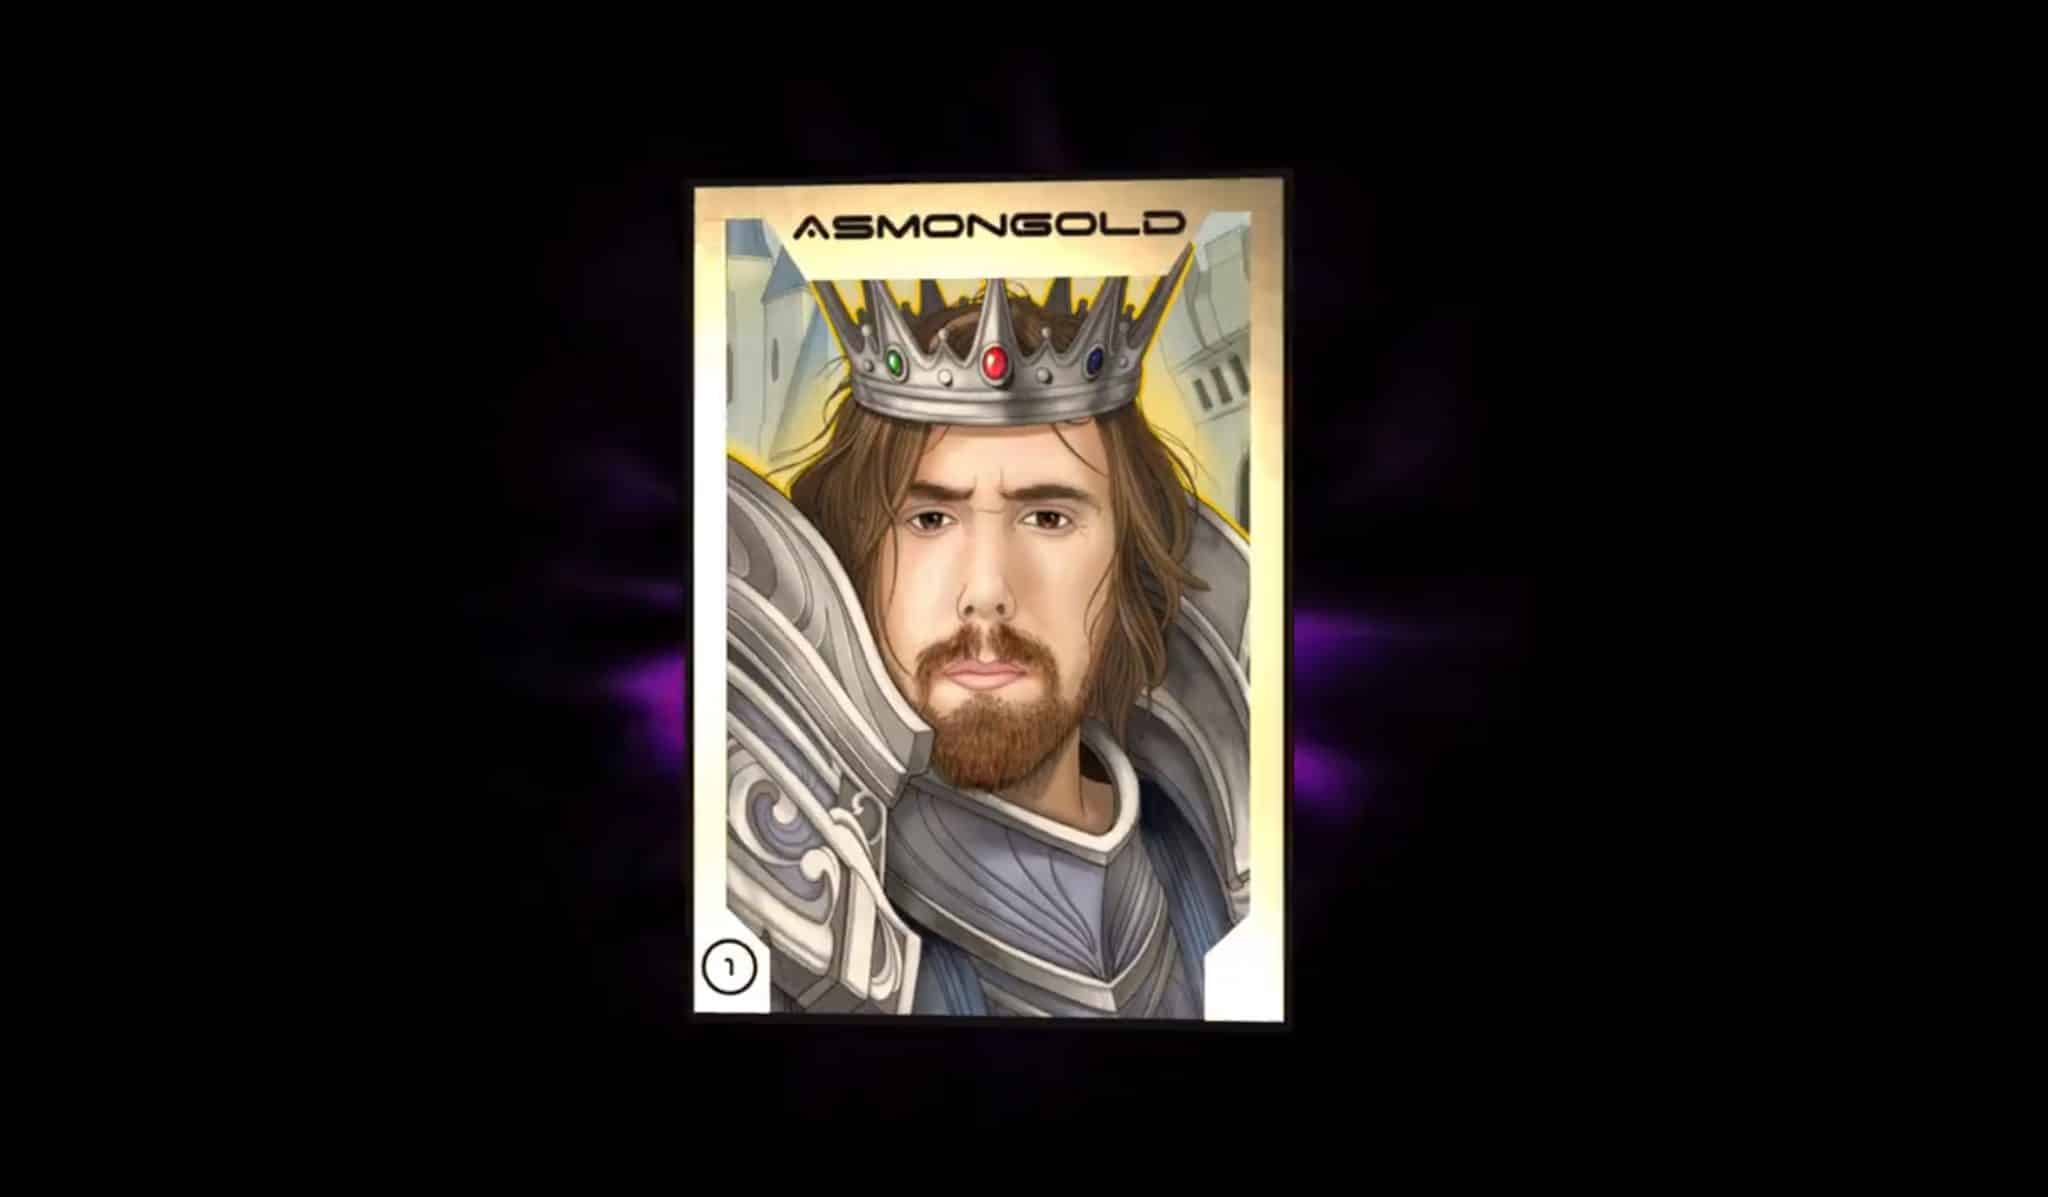 Twitch streamer trading card NFTs